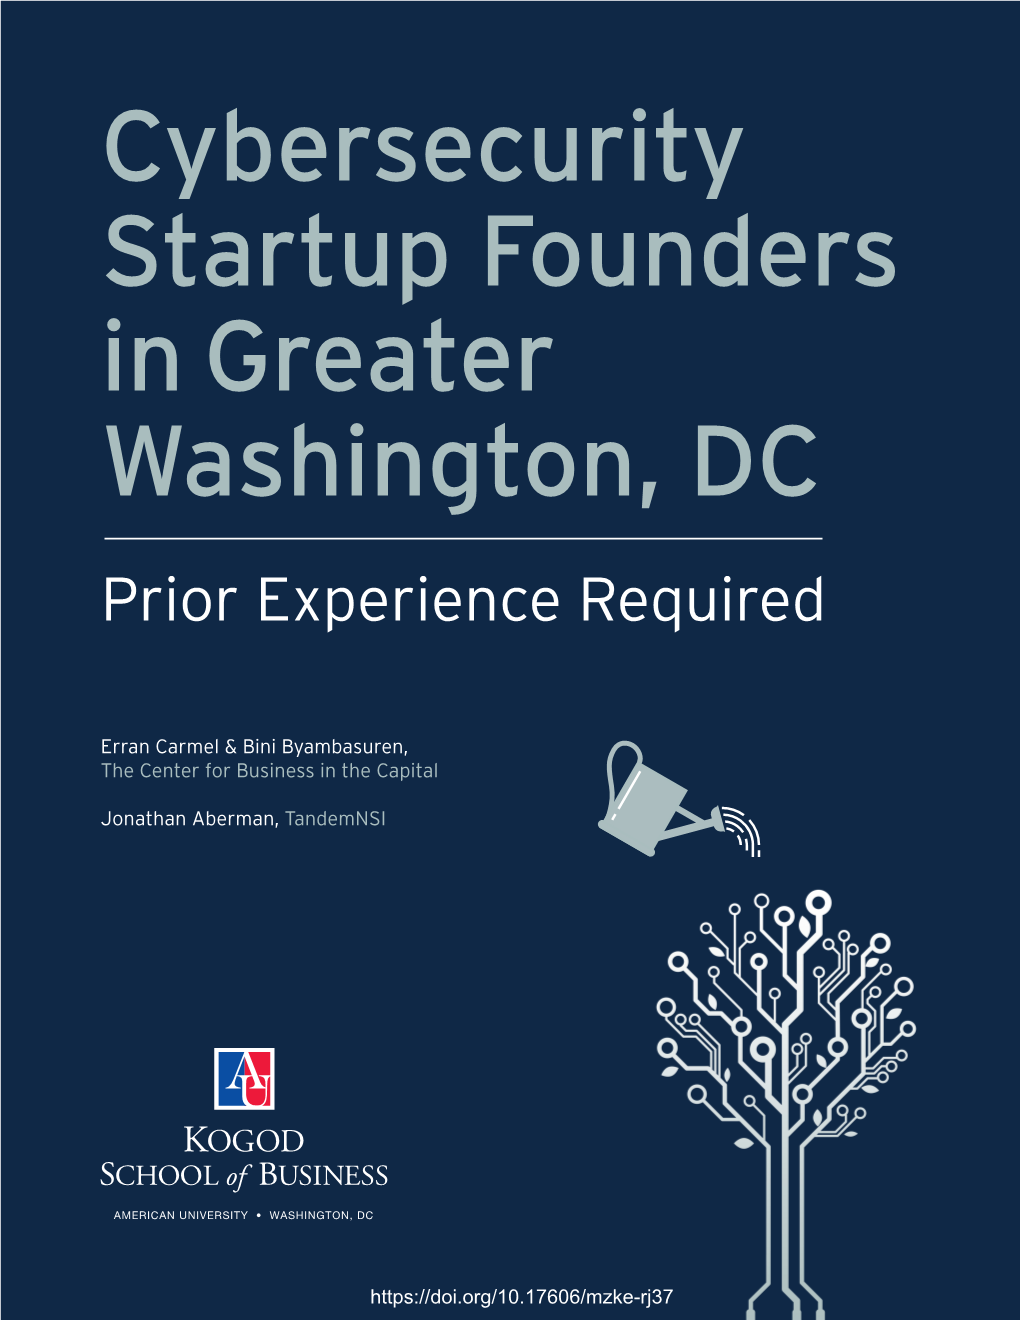 Cybersecurity Startup Founders in the Greater Washington Region